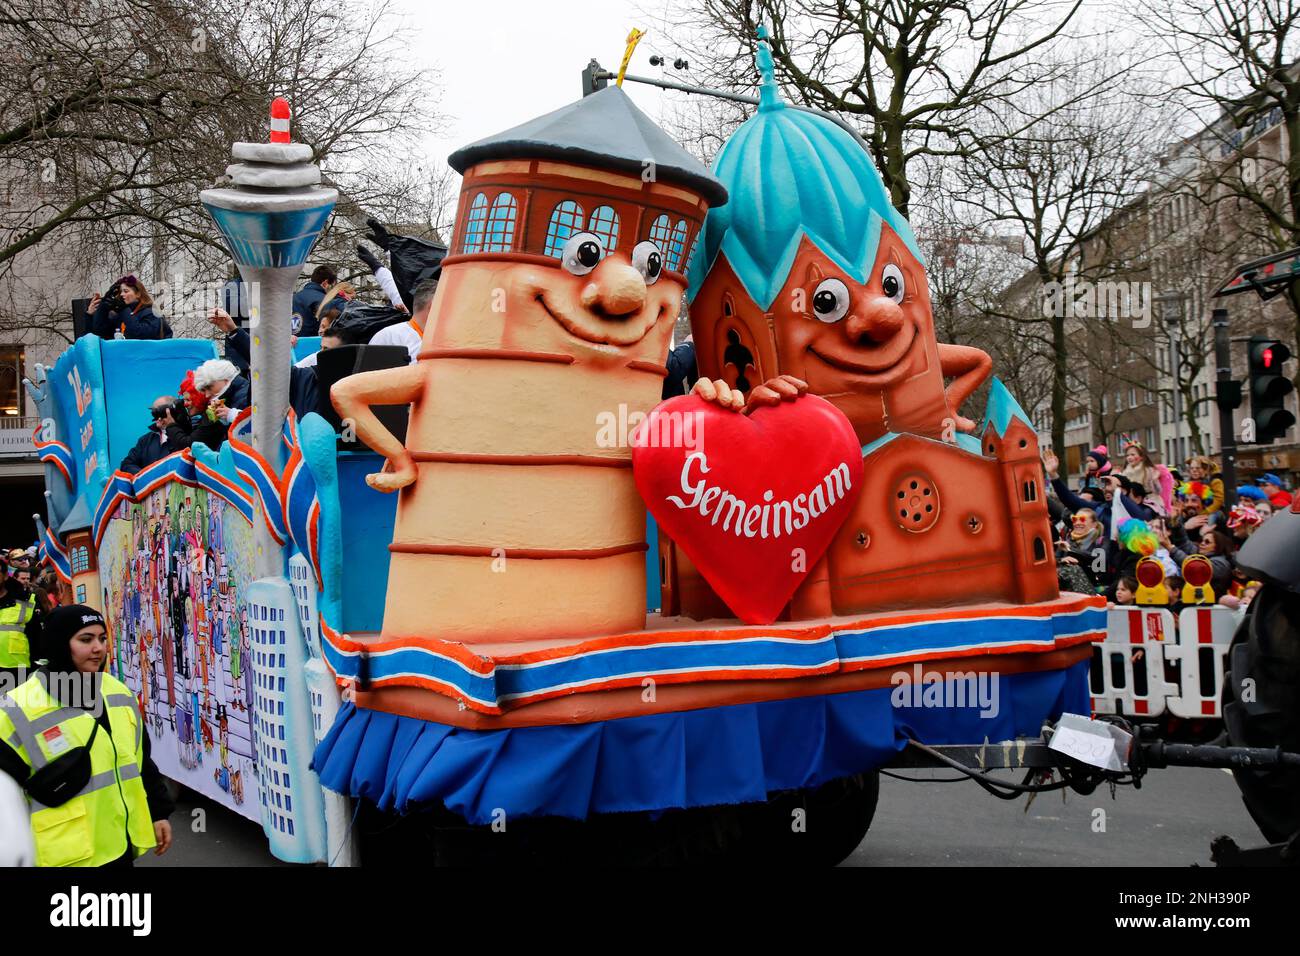 Crowds of many masked revelers cheer the Rose Monday parade in Düsseldorf Stock Photo